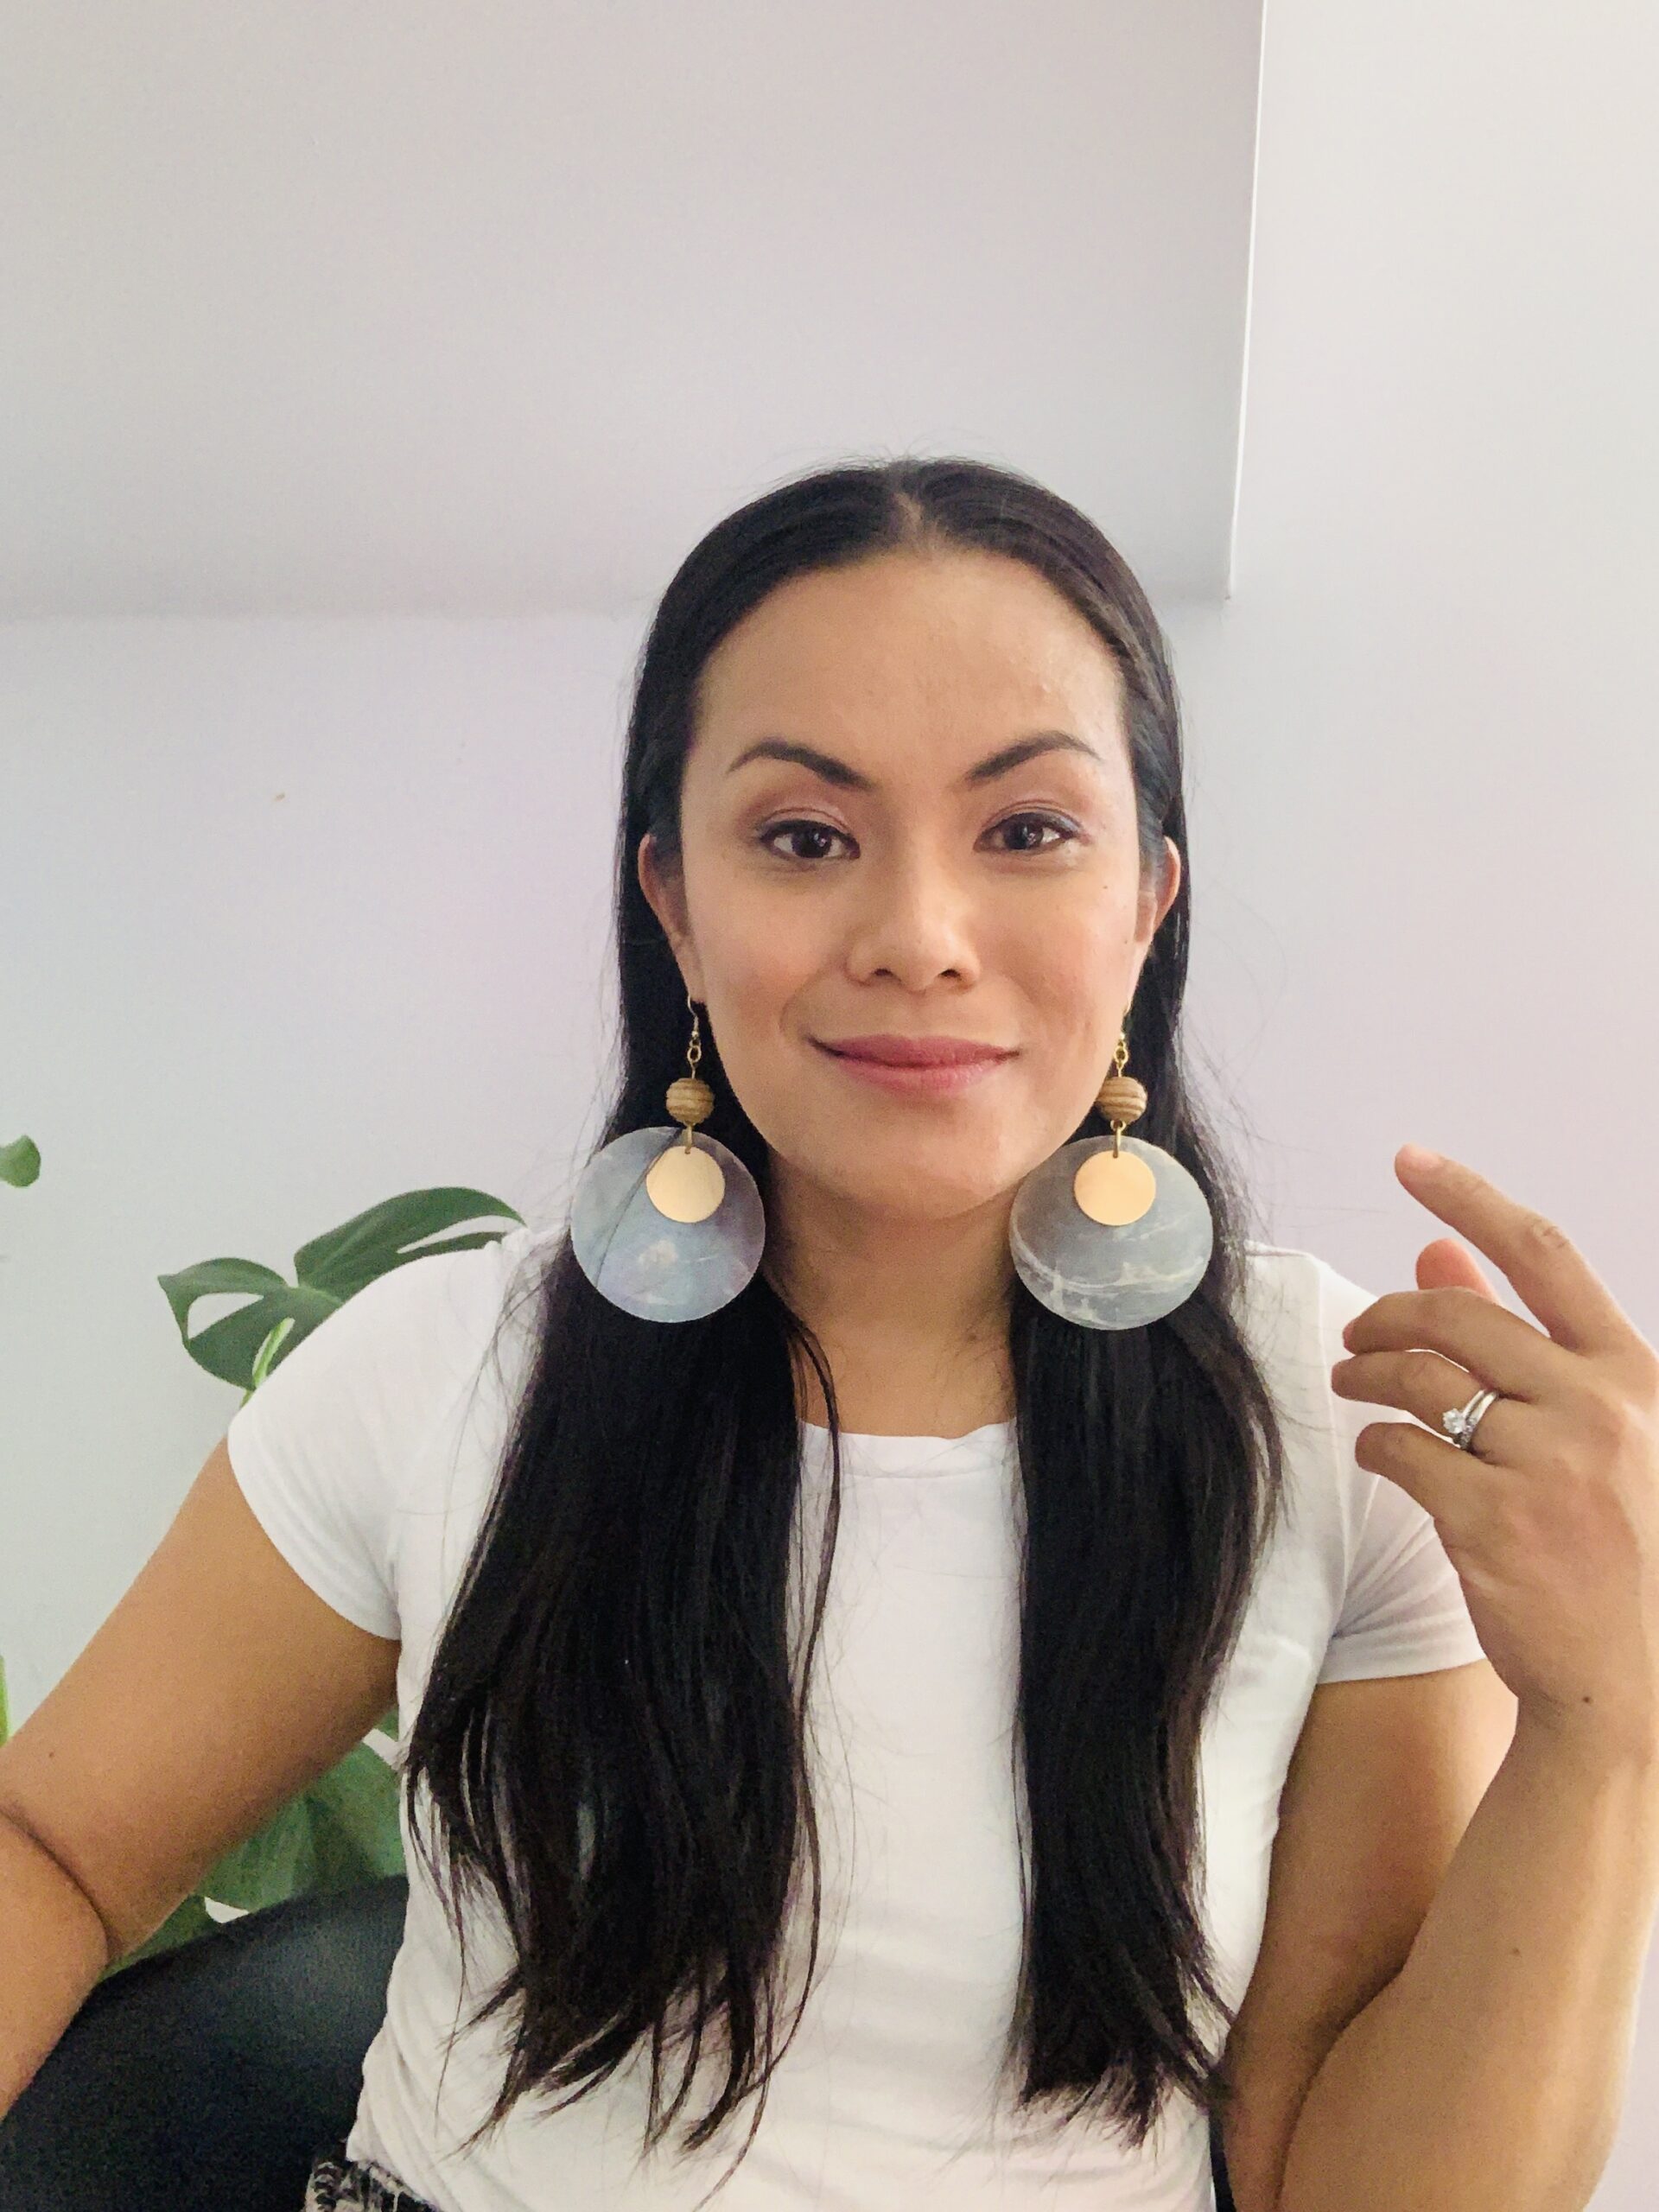 Blessyl Buan is smiling at the camera, wearing a white t-shirt and her long brown hair and large circular earrings framing her face.